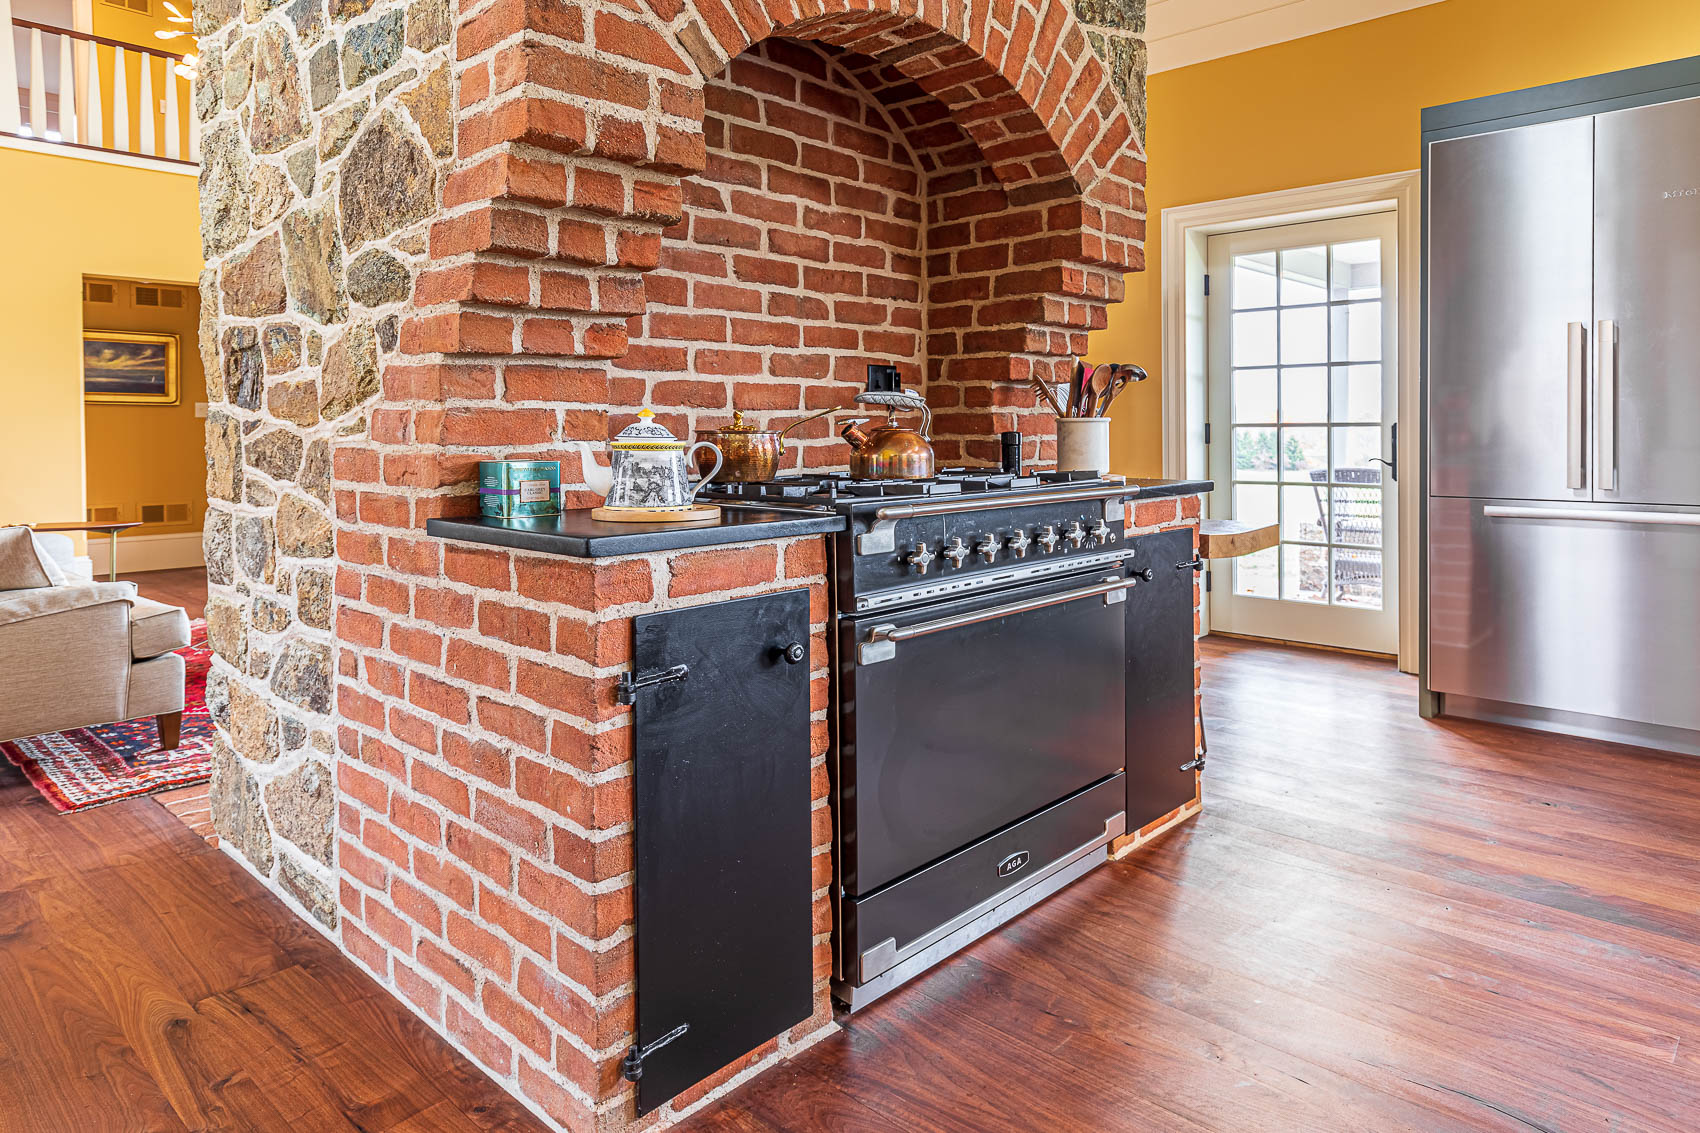 Stove and fireplace in an olde bulltown home